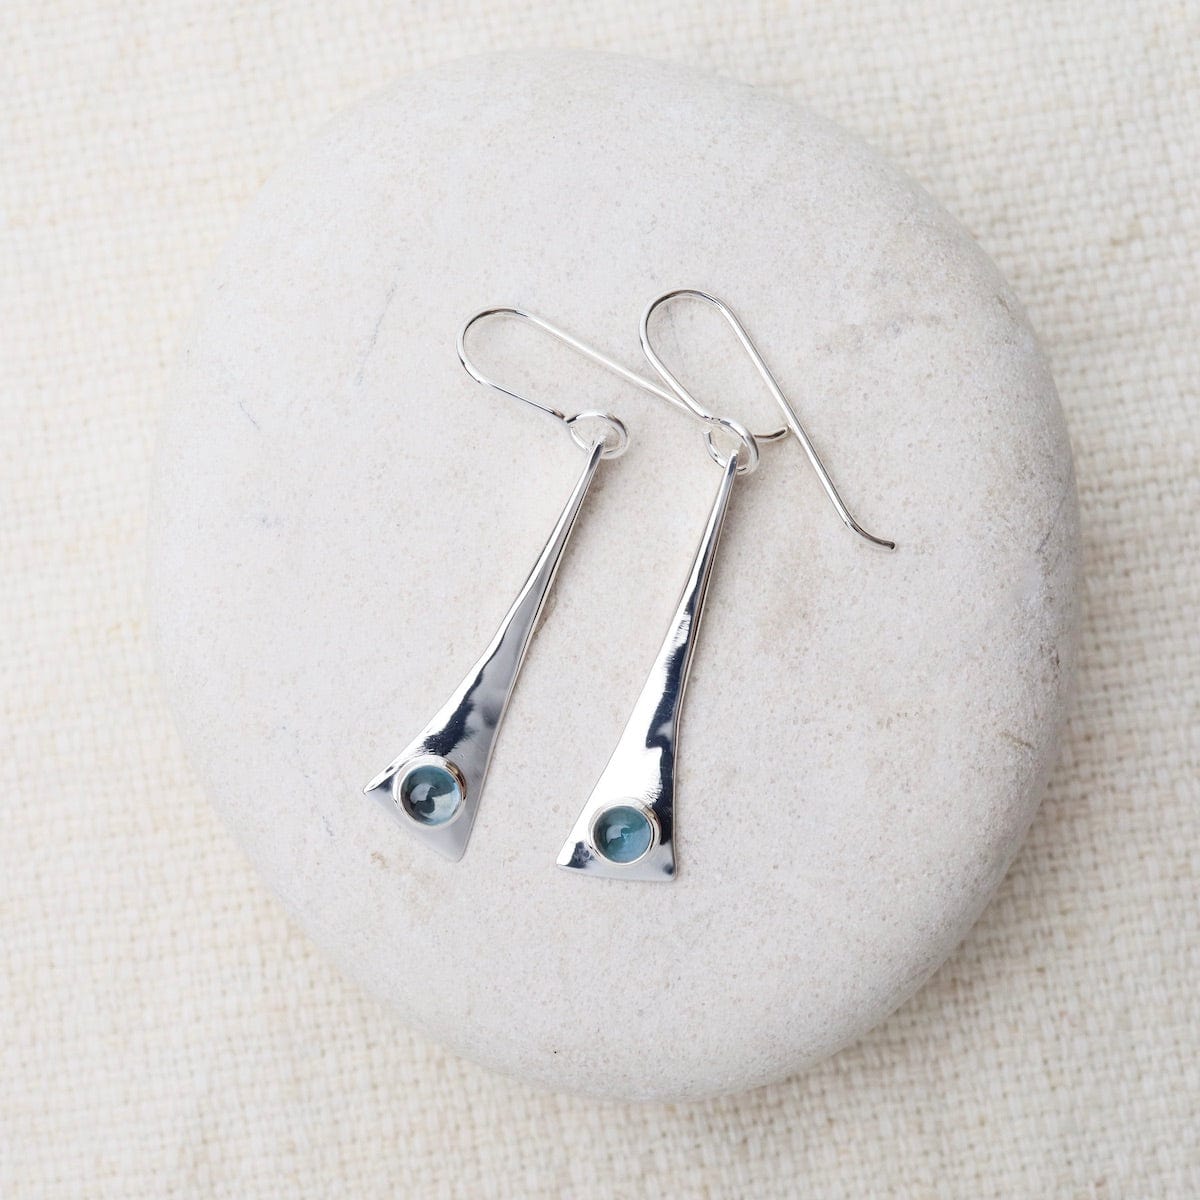 EAR Elongated Triangle Earrings with Blue Topaz Cabochon